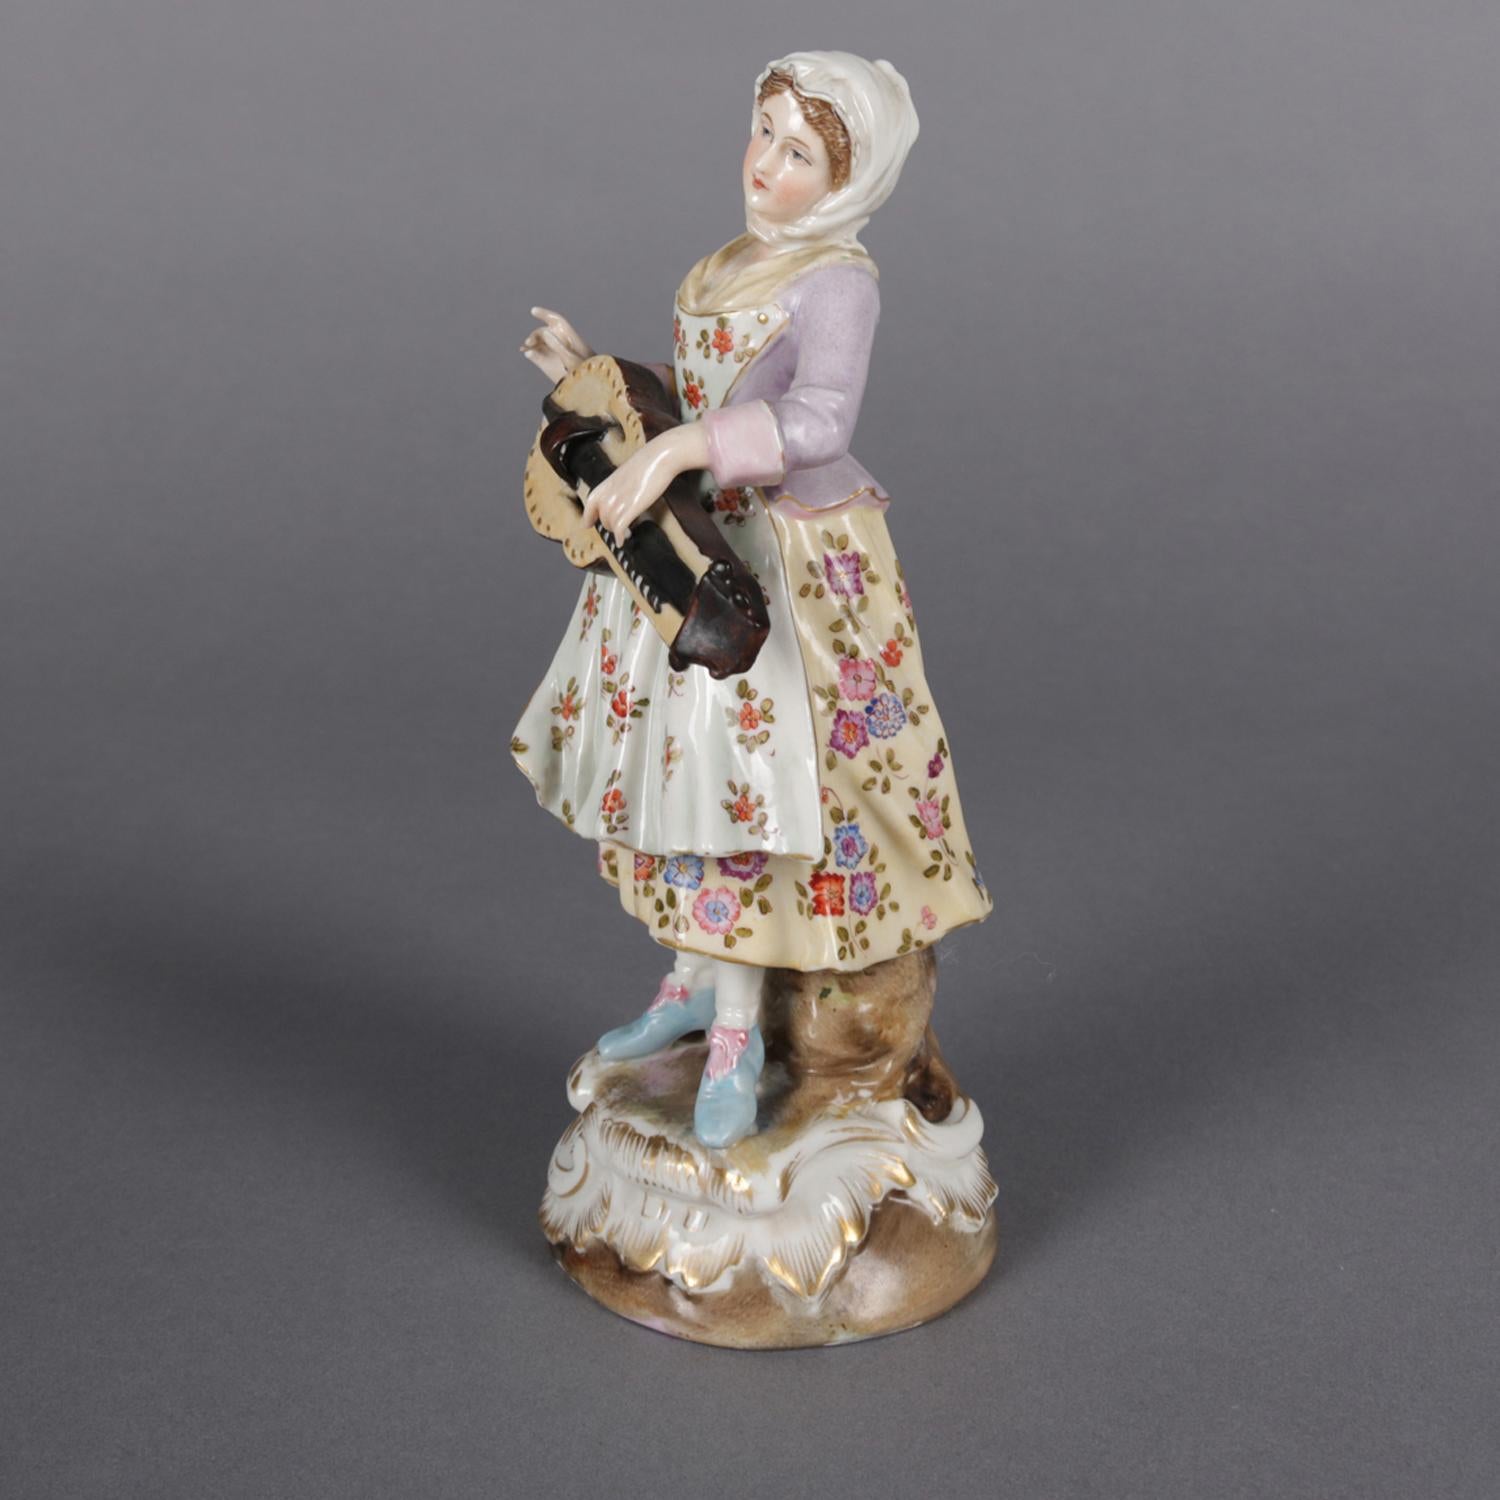 Antique Victorian Chelsea School porcelain figure of female musician features hand painted decoration with gilt highlights, marked on base as photographed, circa 1890.

Measures: 7